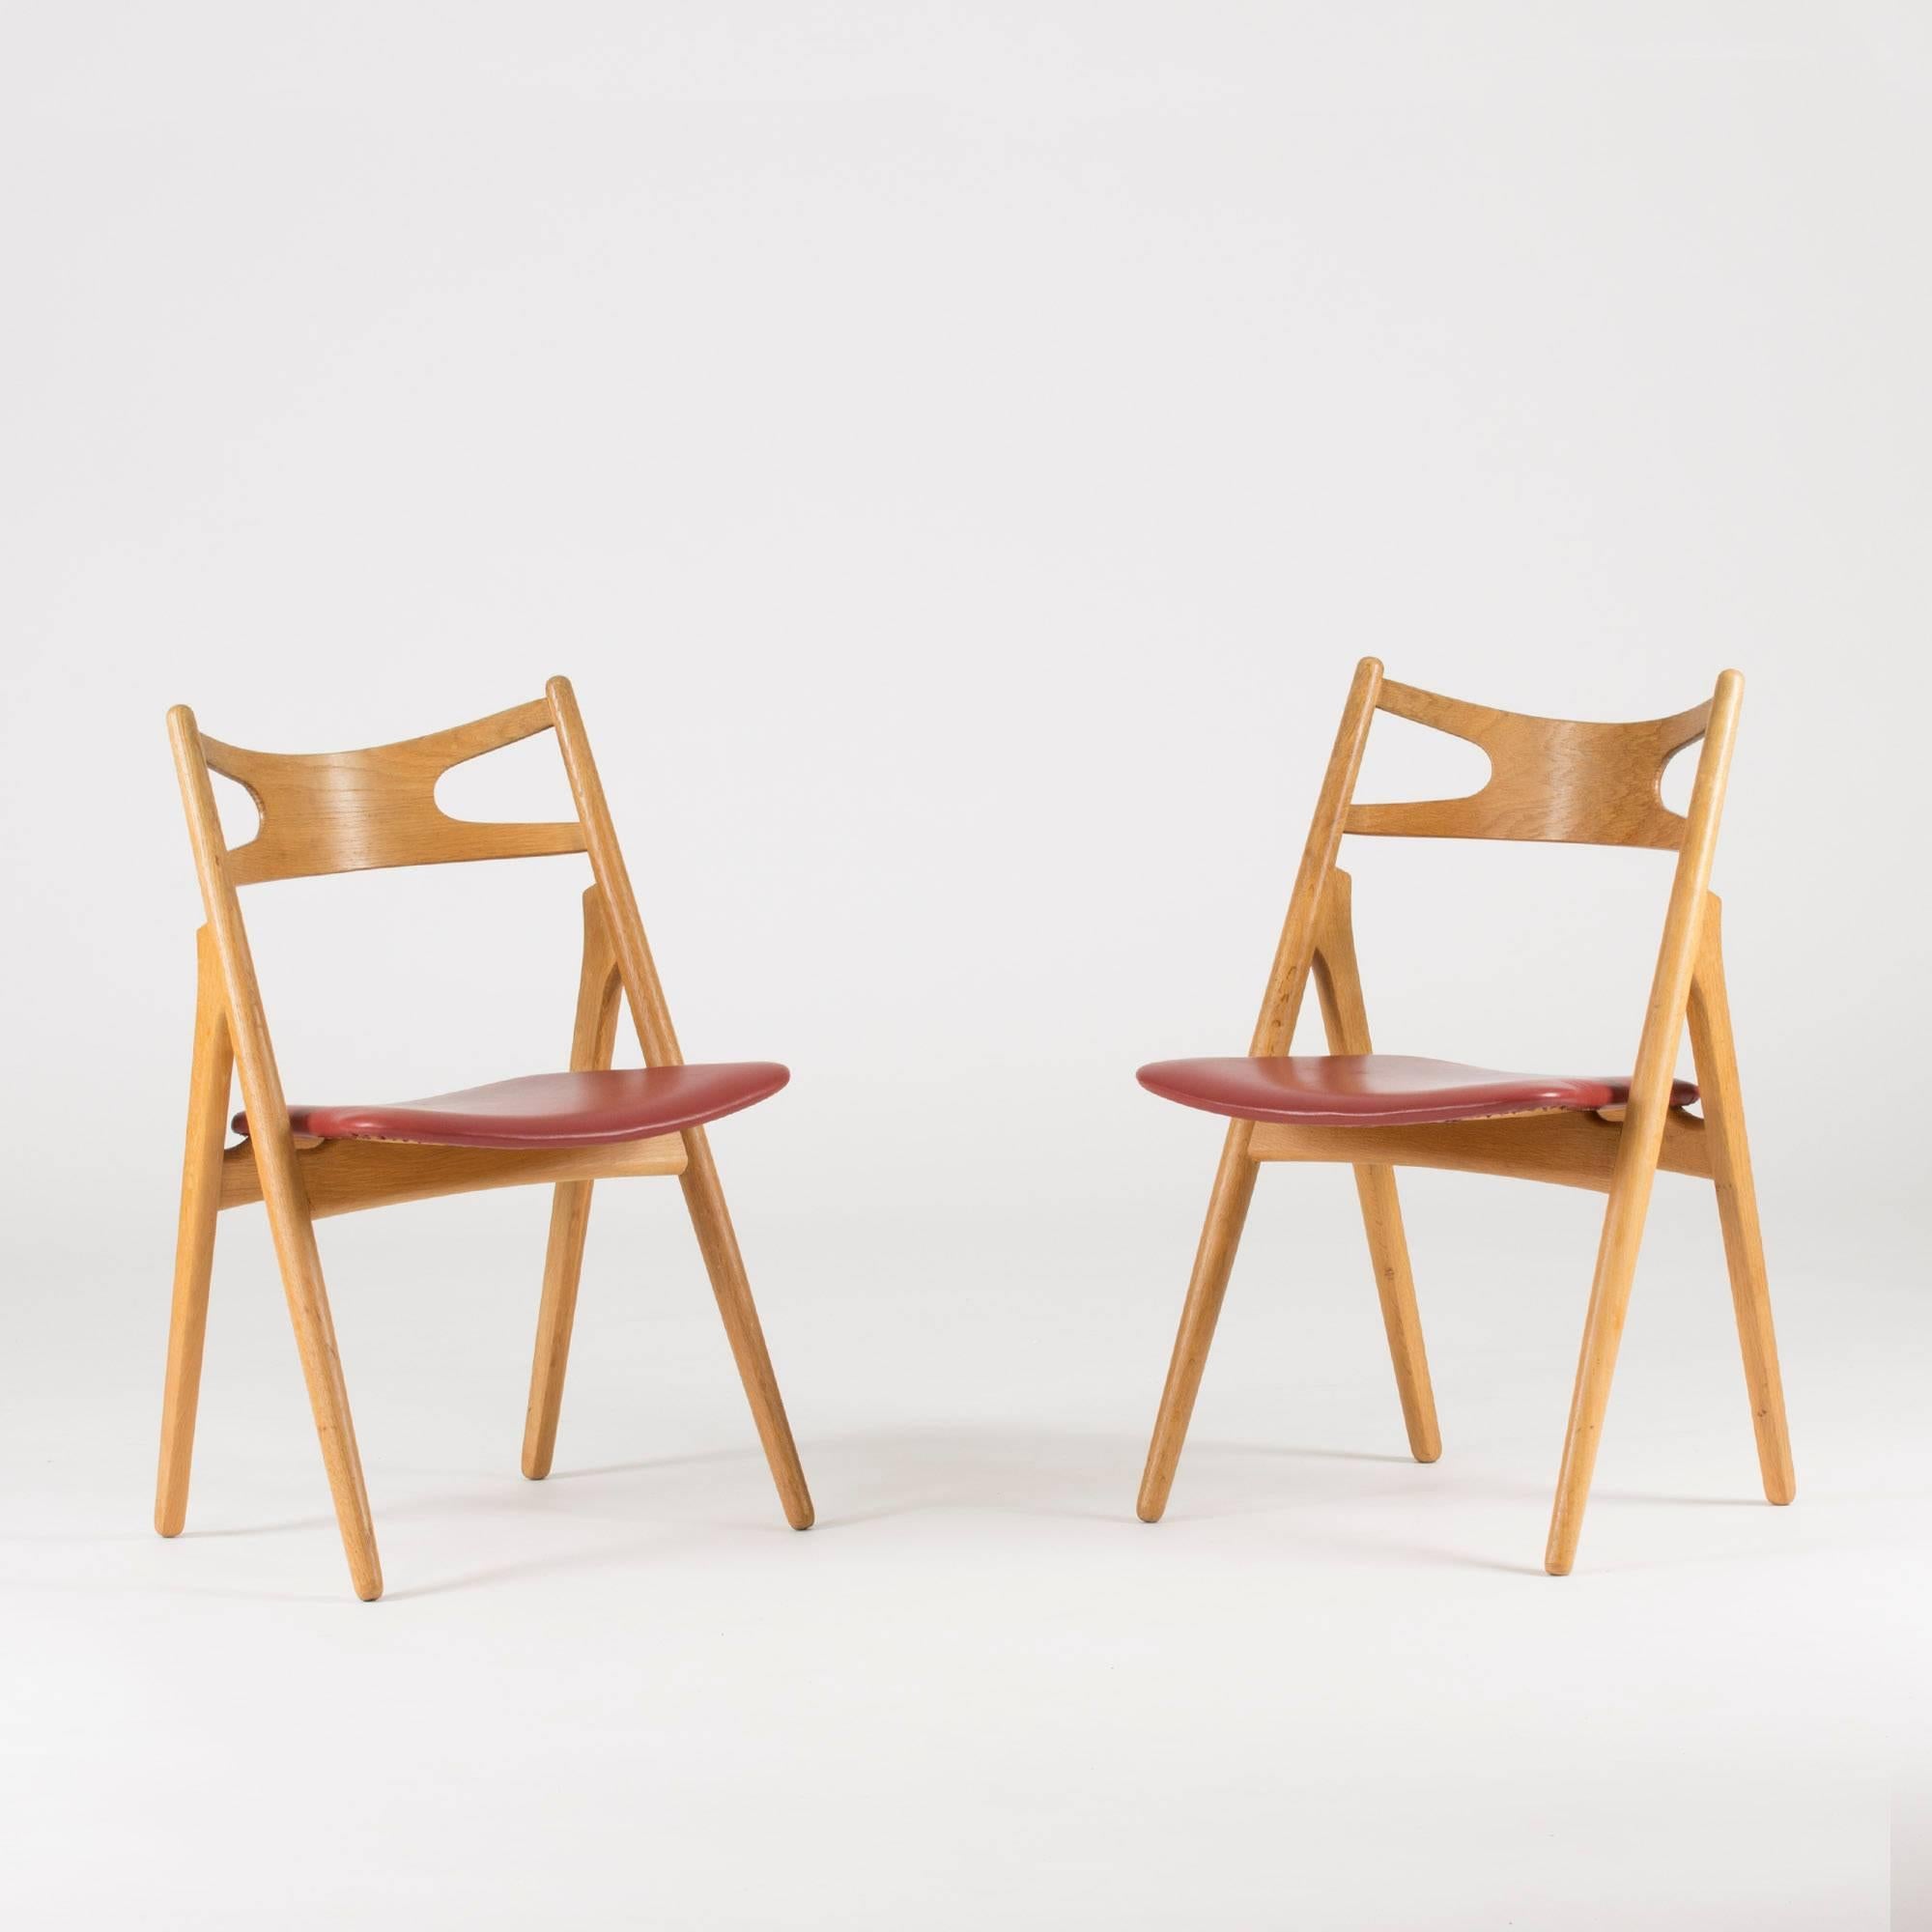 Set of six "Sawbuck" dining chairs by Hans J. Wegner, made of oak and reupholstered with beautiful red vintage leather. Gorgeous chairs with high comfort. Designed in 1952. Manufactured in the 1960s.